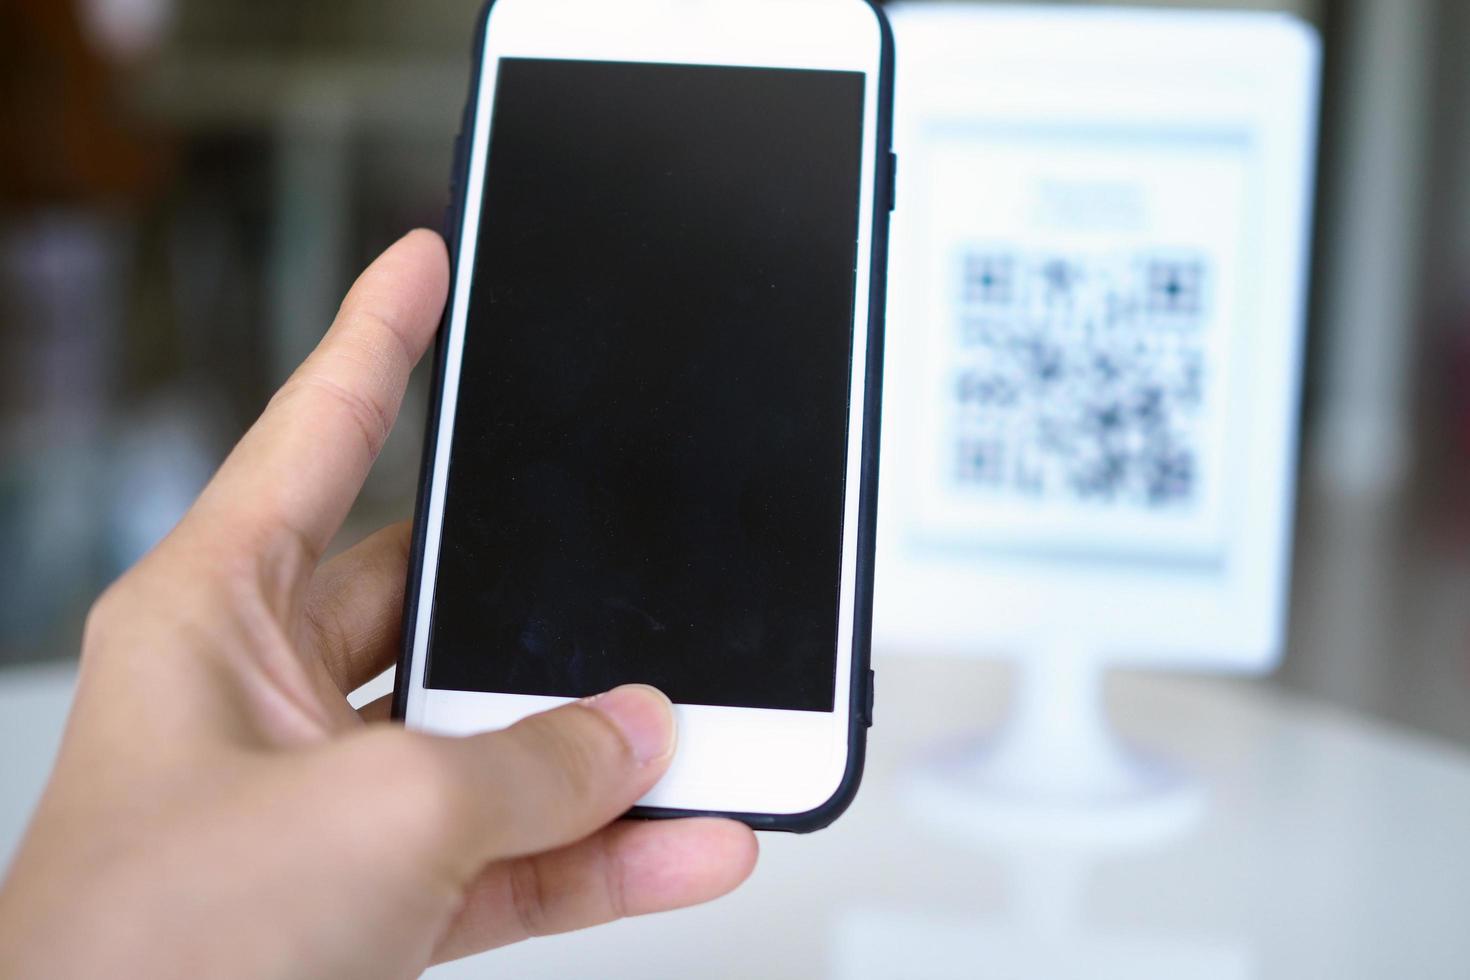 Hands use the phone to scan QR codes to receive discounts on purchases. photo